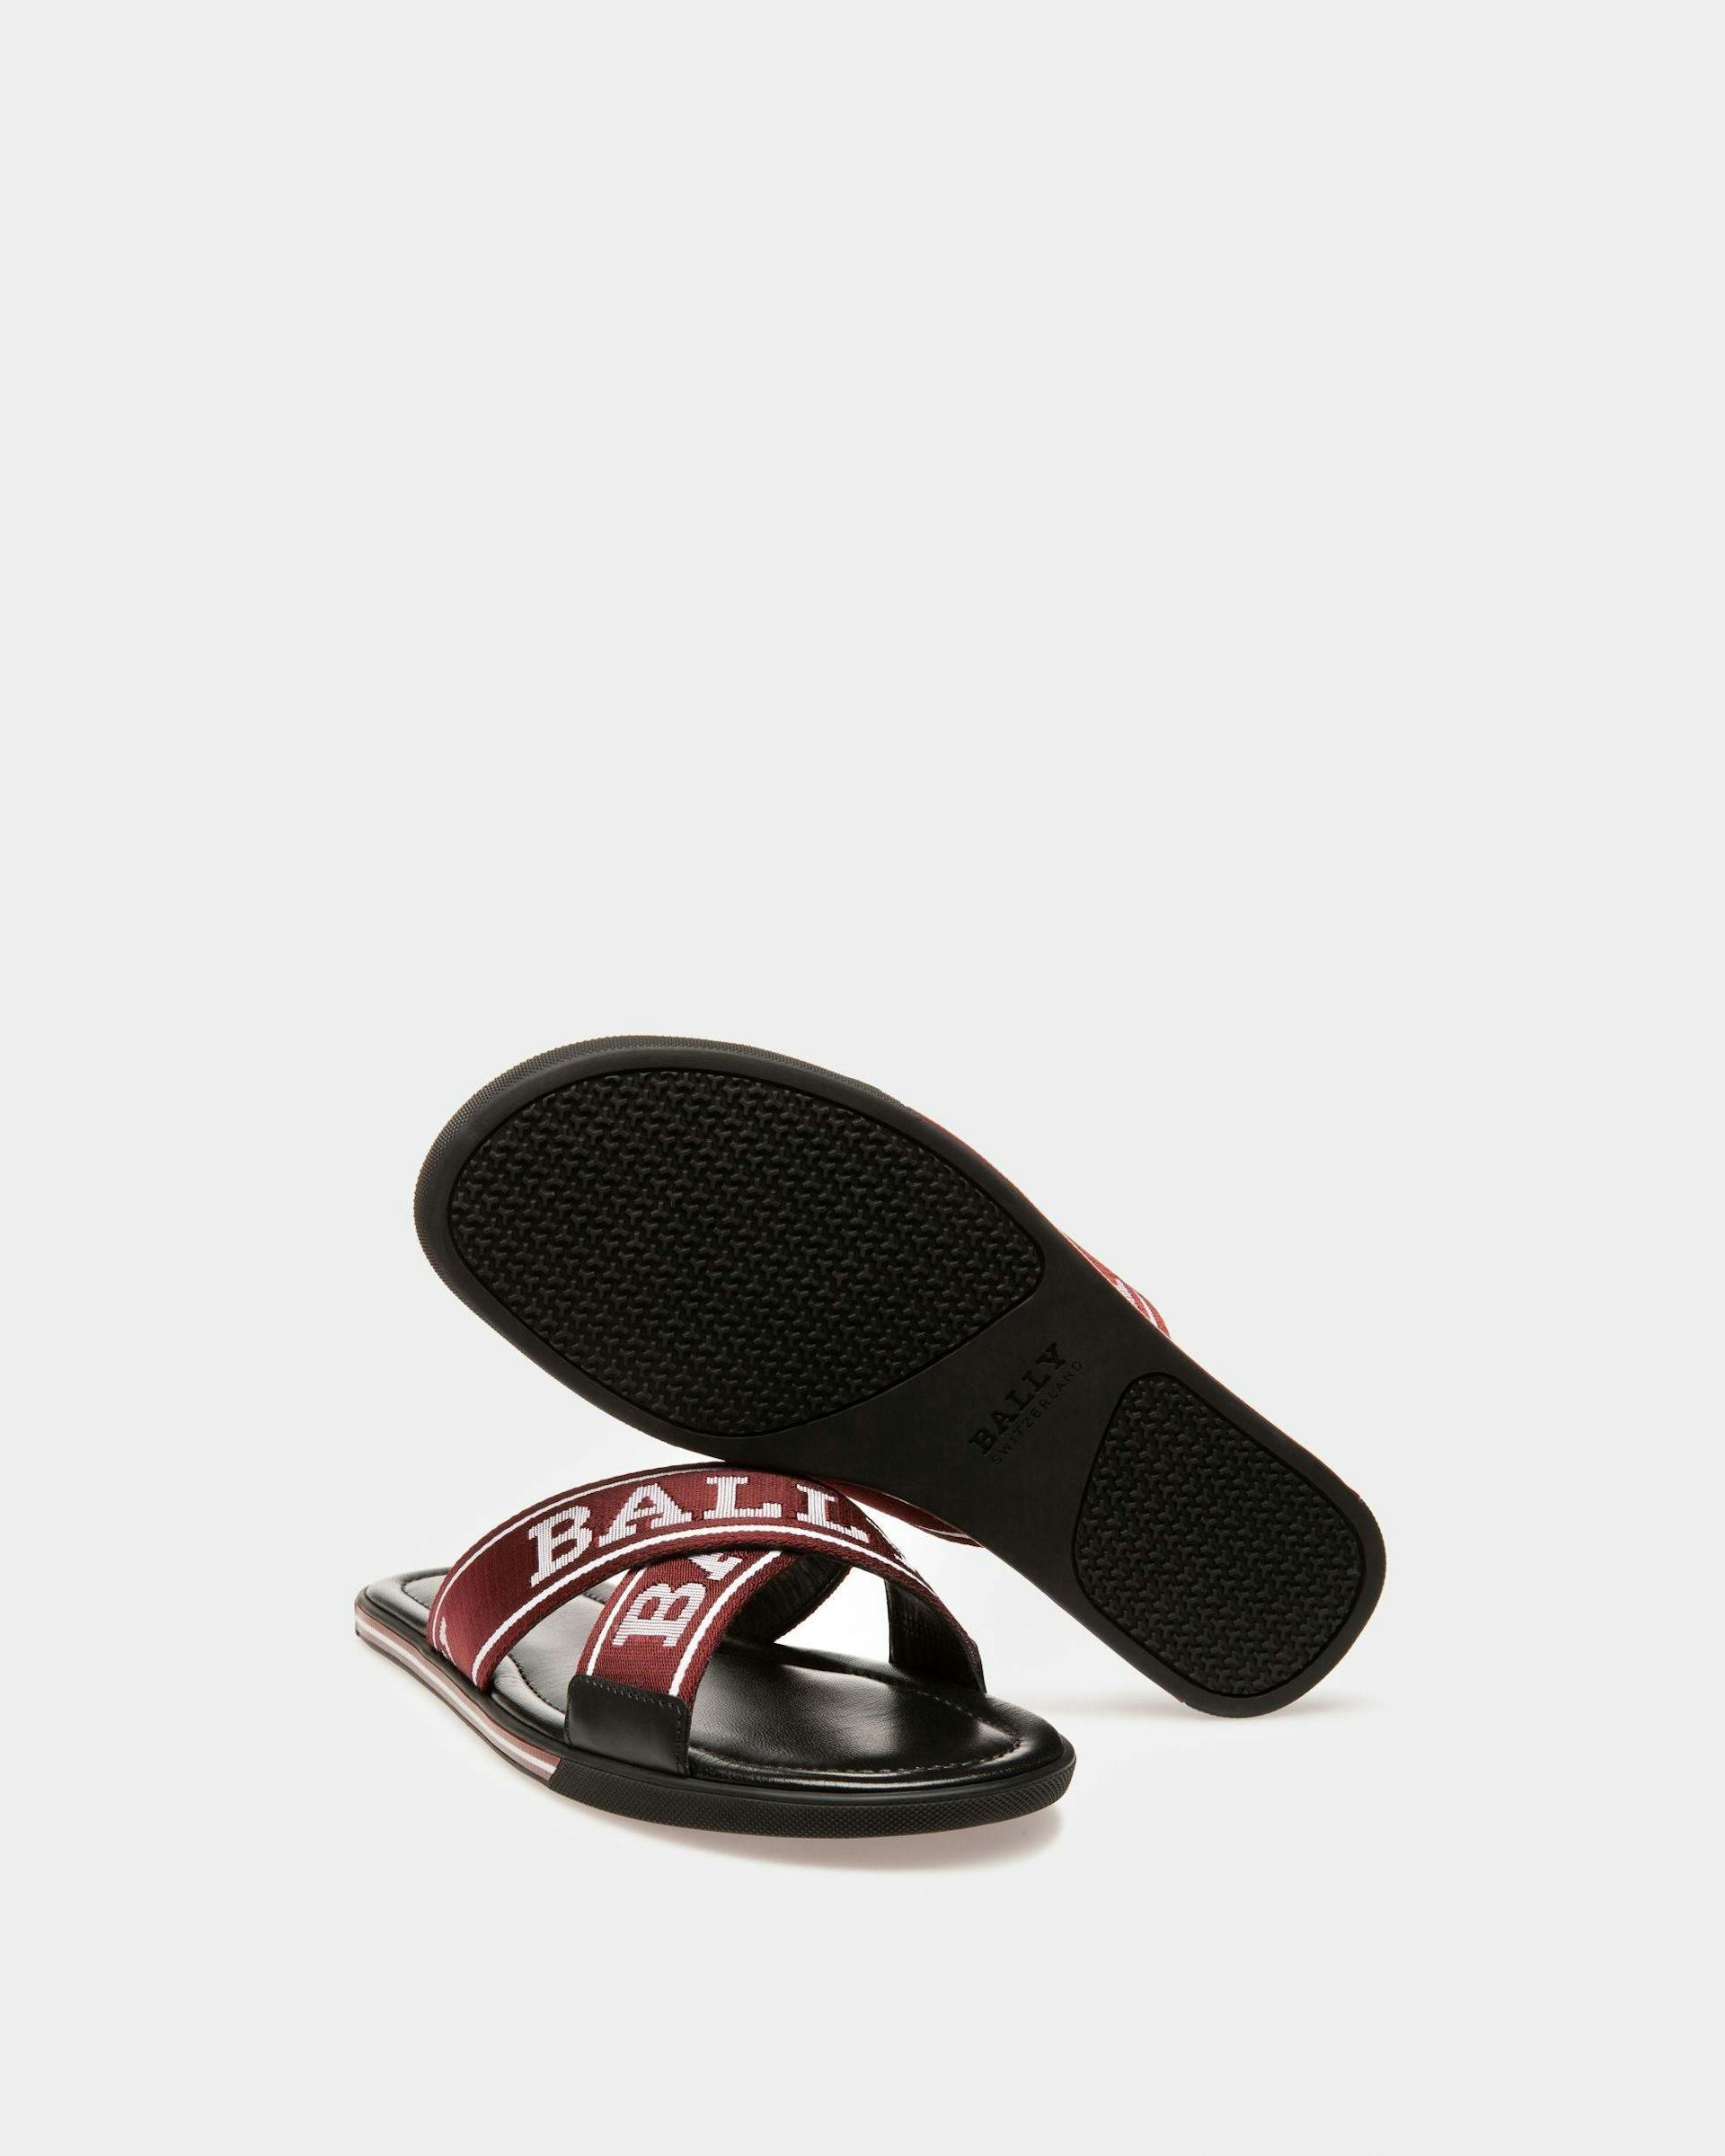 Bonks Fabric & Leather Sandals In Bally Red - Men's - Bally - 04